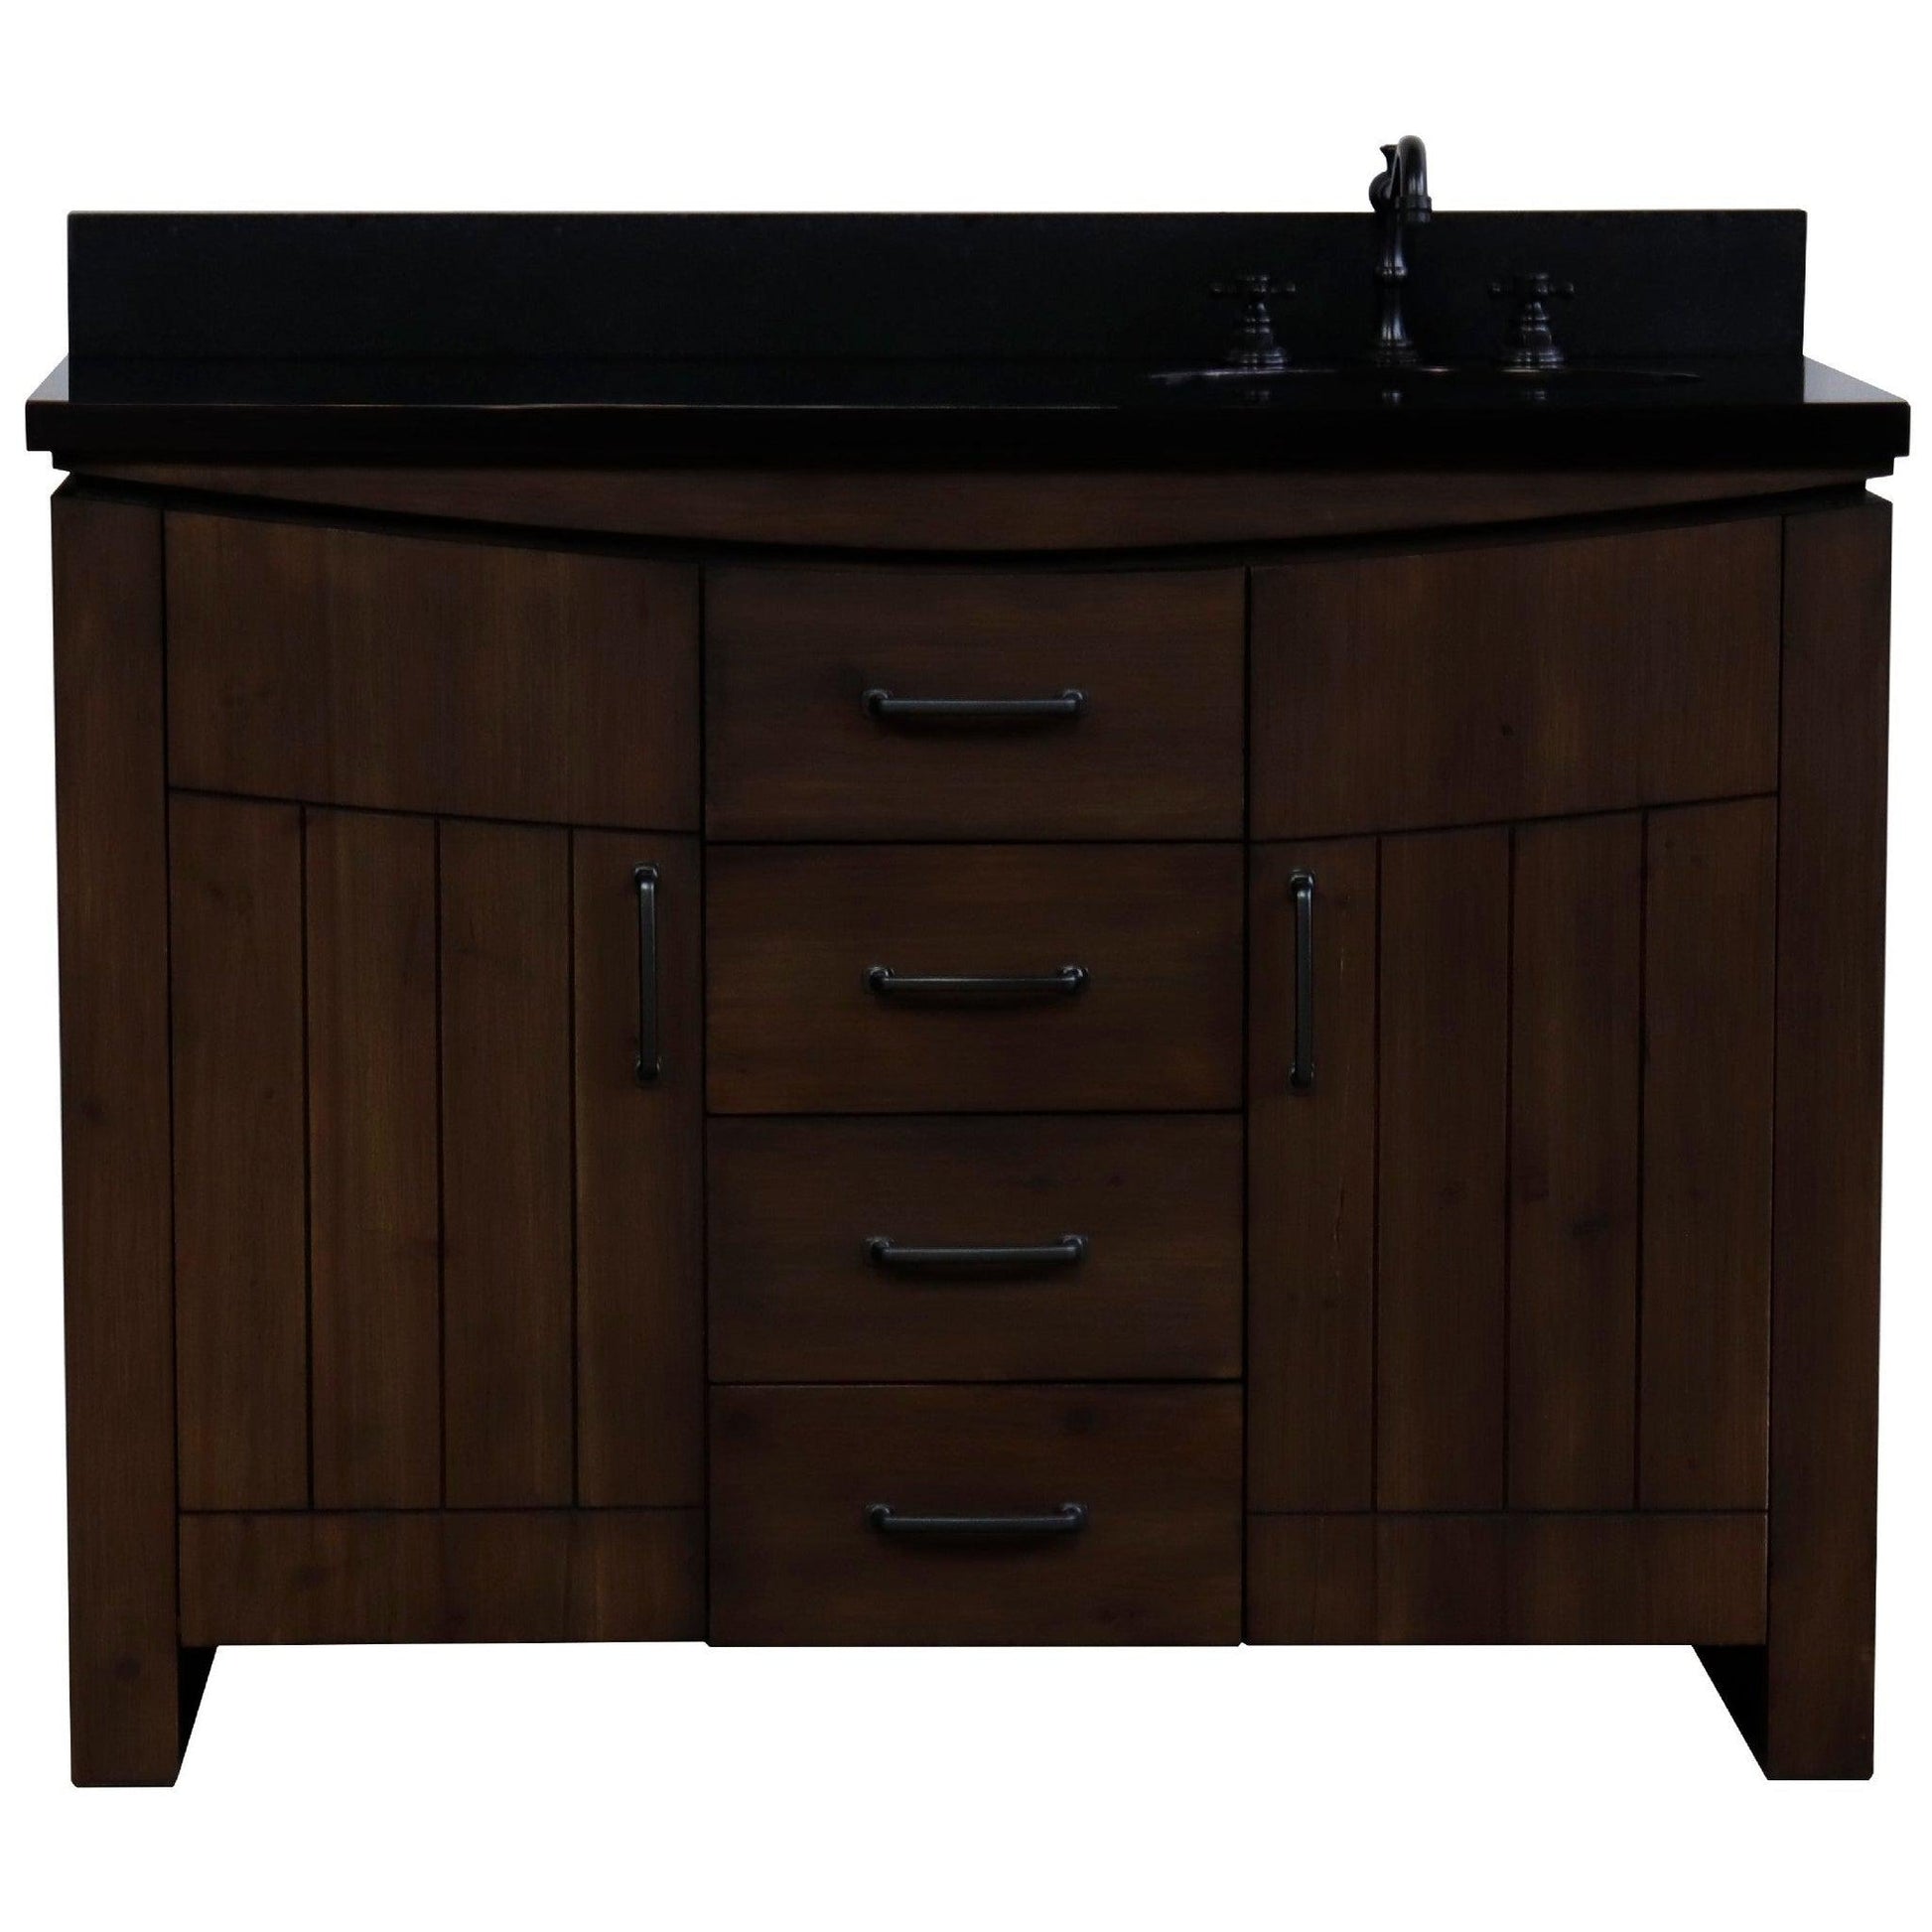 Bellaterra Home 48" 2-Door 3-Drawer Rustic Wood Freestanding Vanity Set With Ceramic Right Offset Undermount Oval Sink and Black Galaxy Granite Top